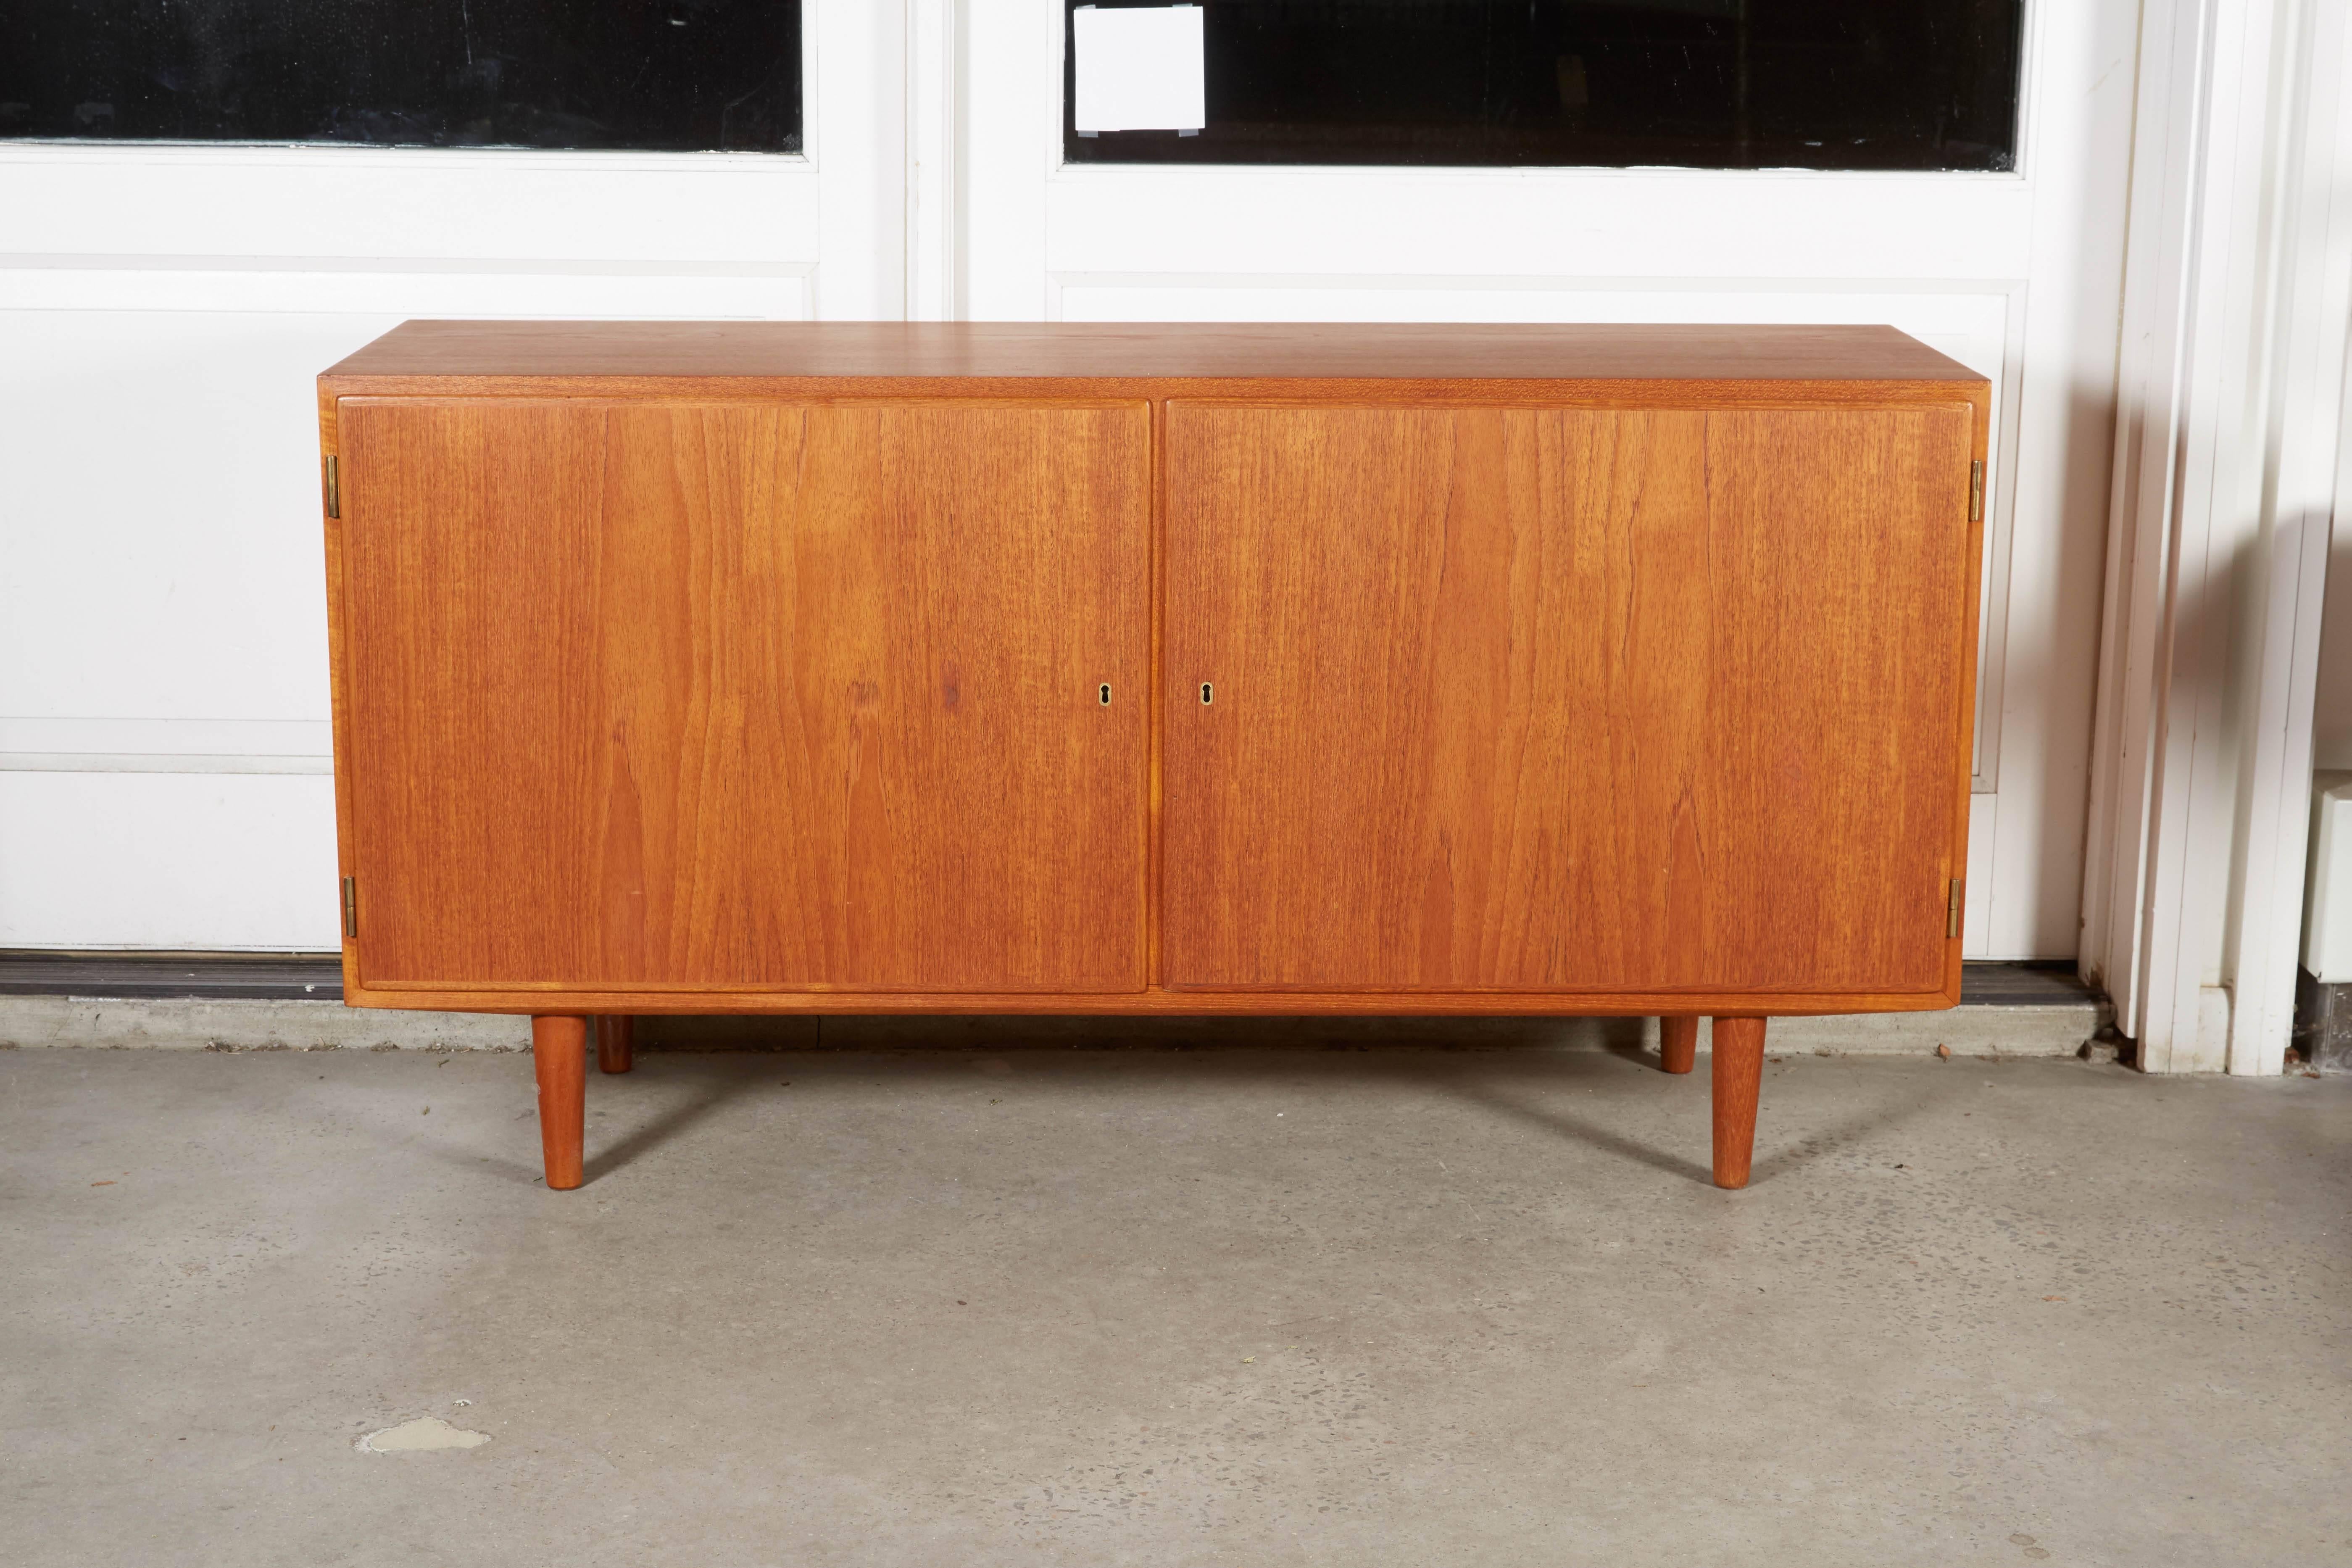 Vintage 1960s Kai Winding Teak Credenza

This mid century sideboard is in excellent condition, like new. Great for media, or dining room storage. Has key. Ready for pick up, delivery, or shipping anywhere in the world.